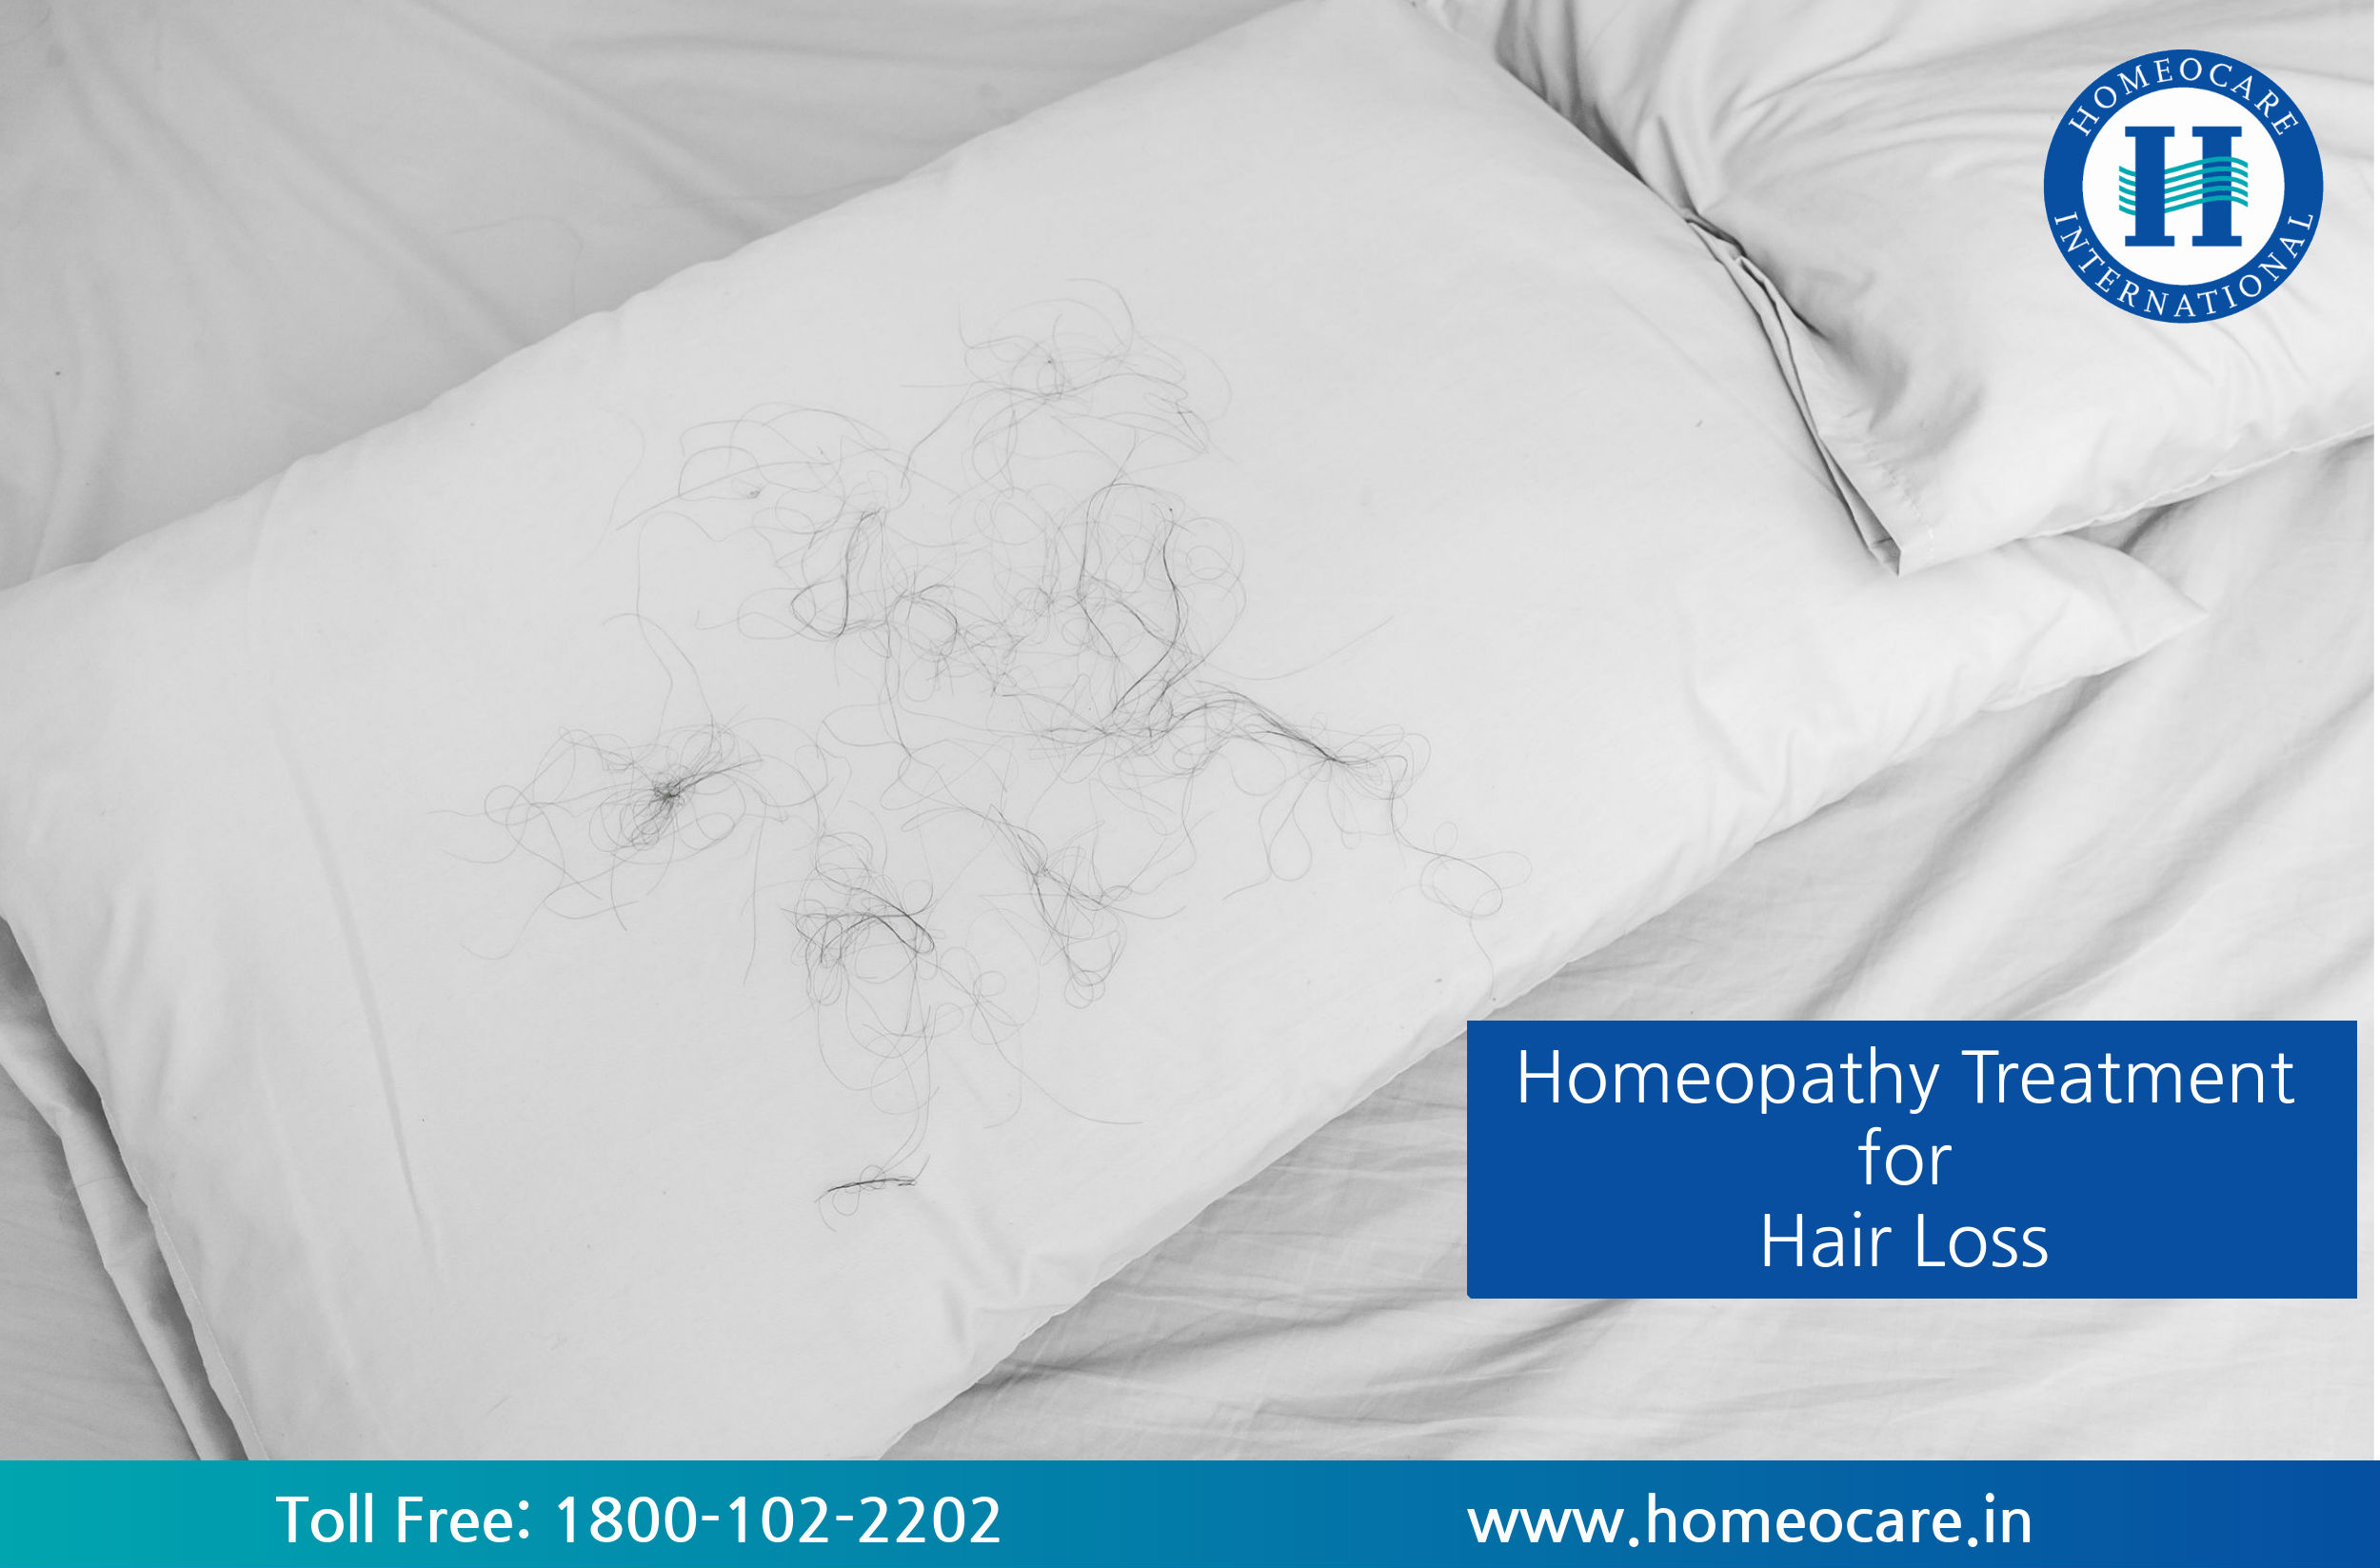 How to regain Hair through Homeopathy Treatment and Medicines